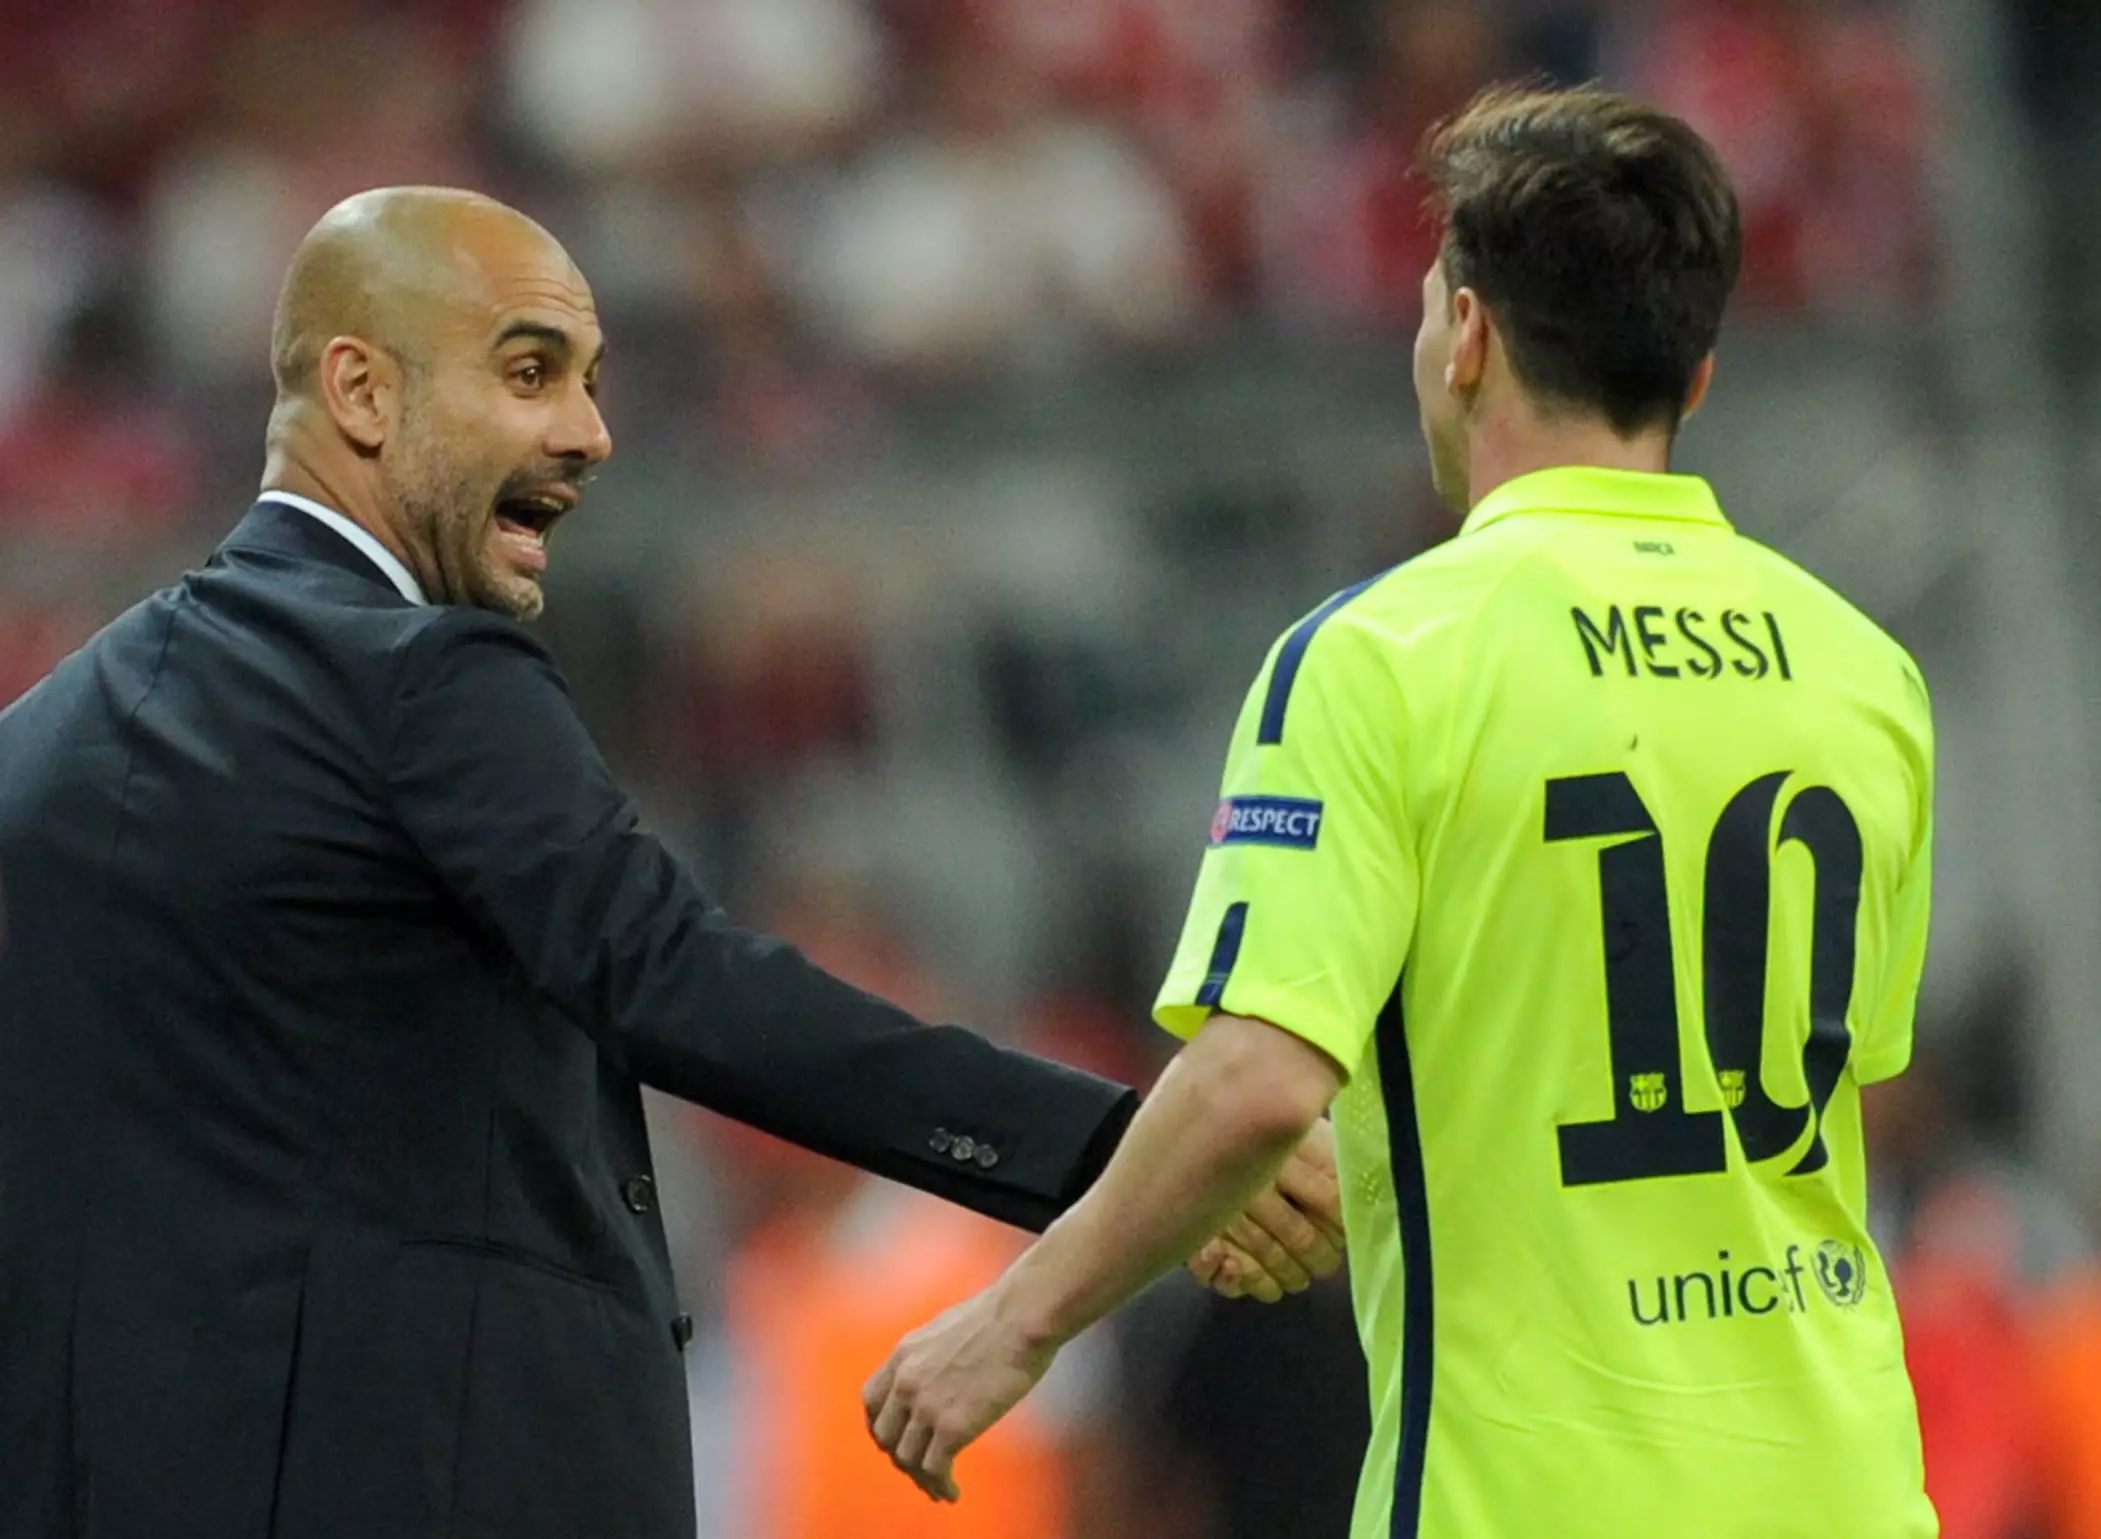 Messi could be reunited with Guardiola. Image: PA Images